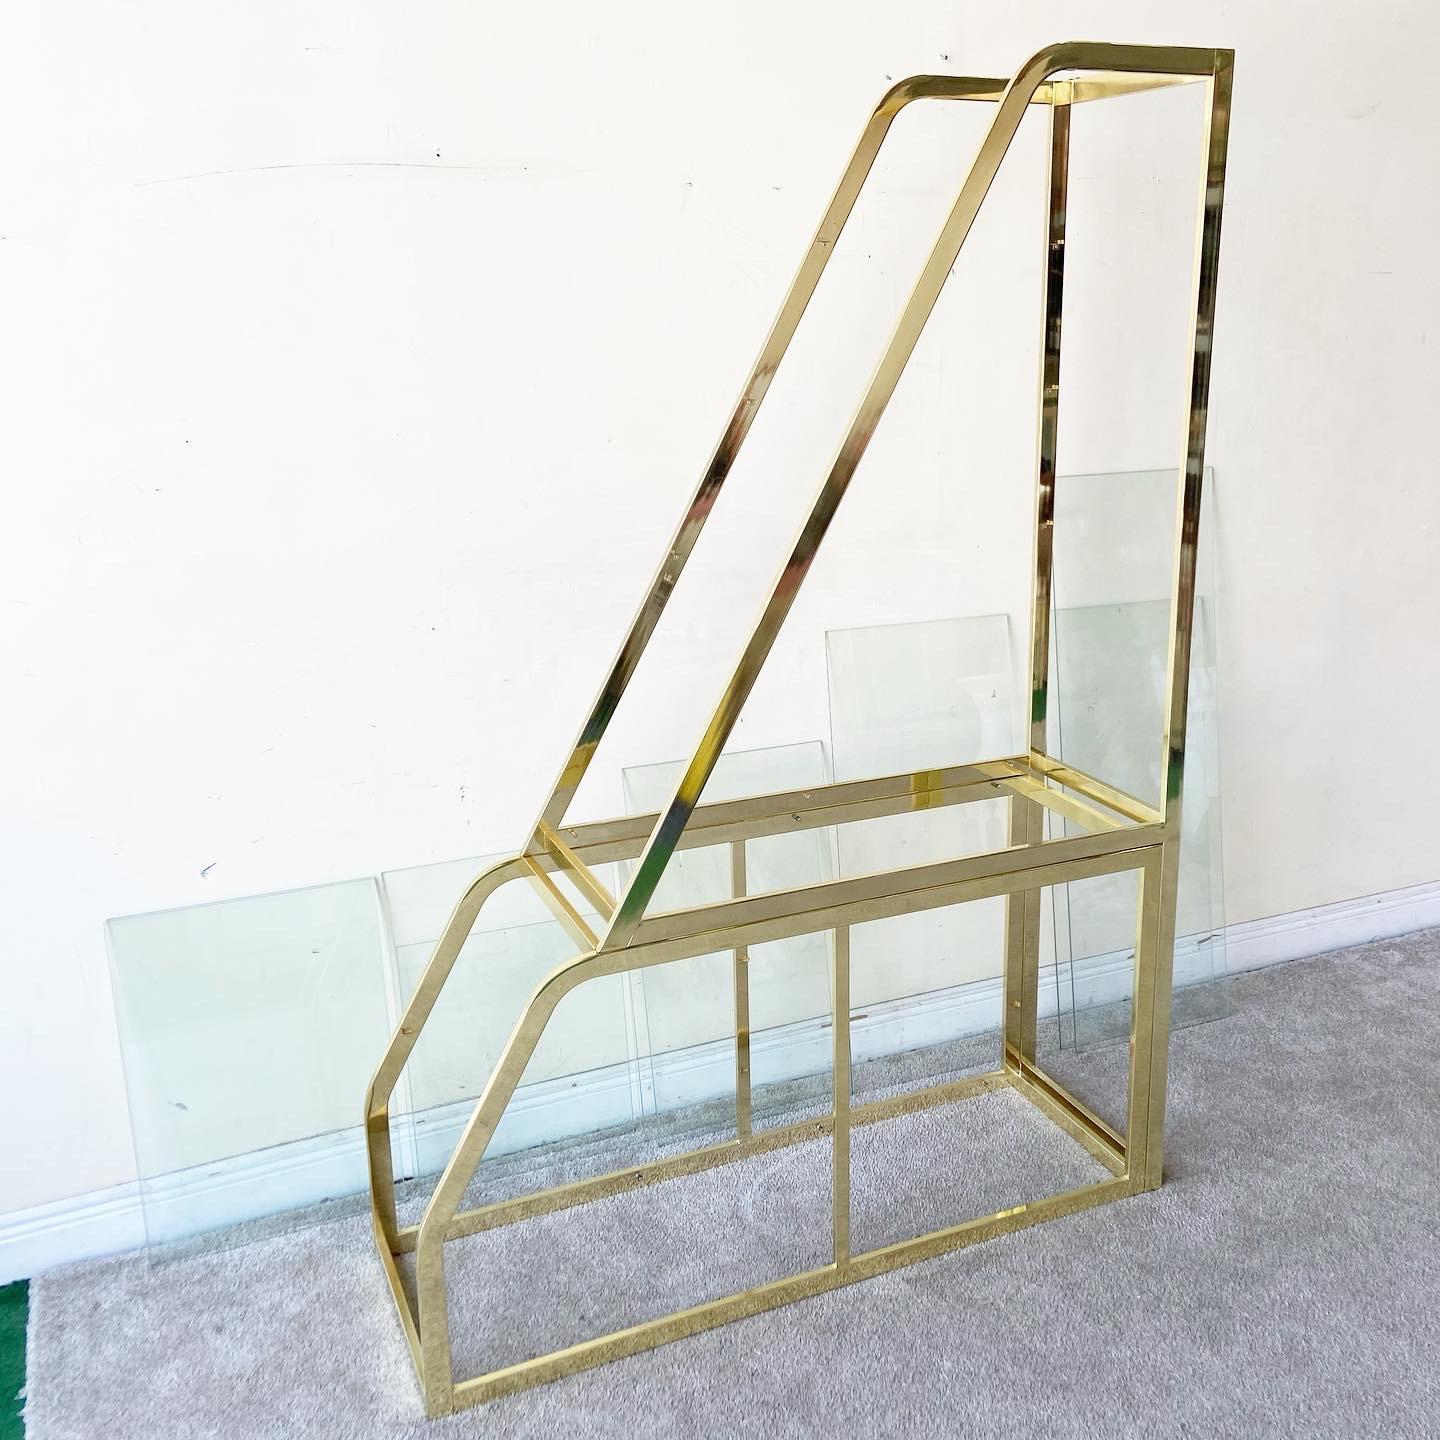 American Hollywood Regency Extendable Glass and Gold Etagere by DIA